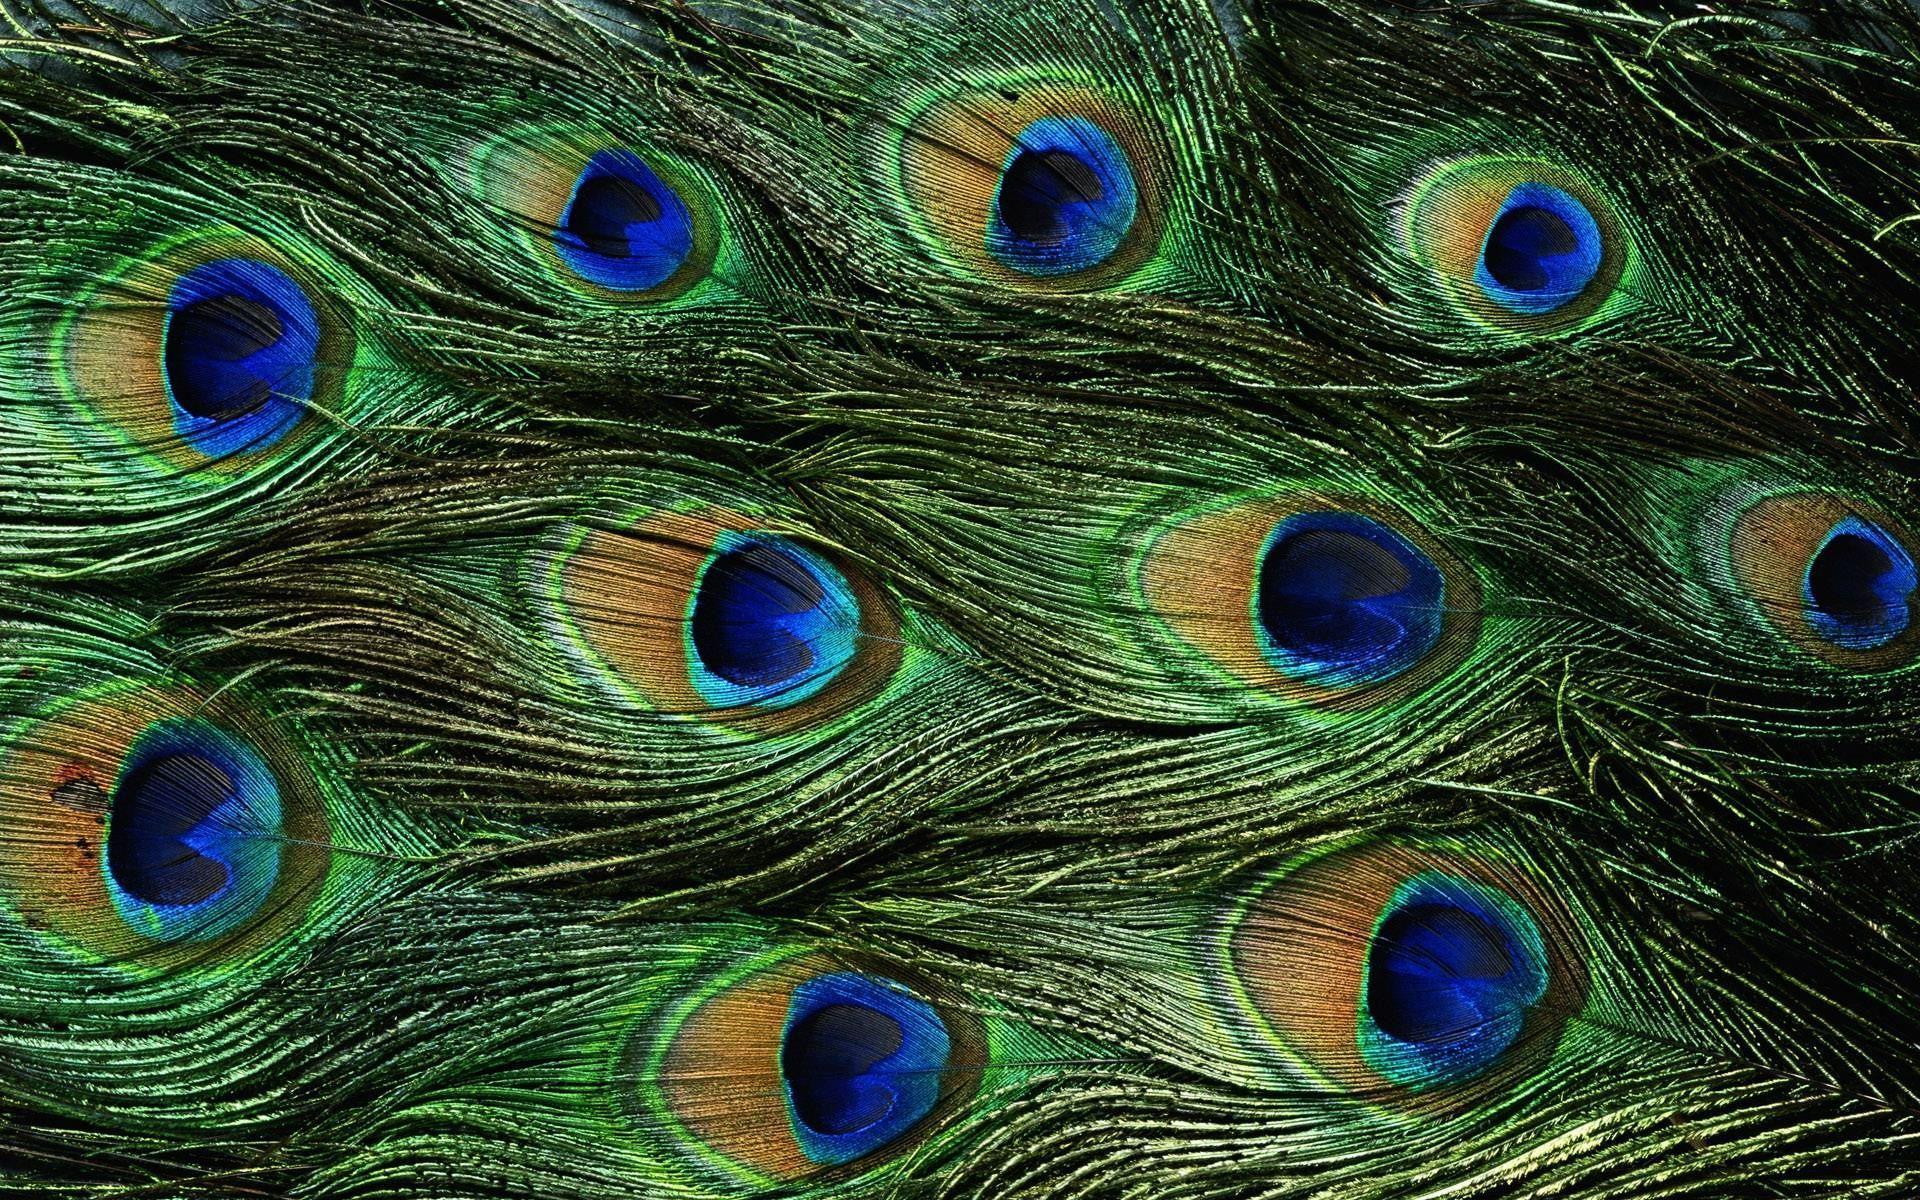 Peacock Feather Wallpapers For Android ~ Sdeerwallpapers